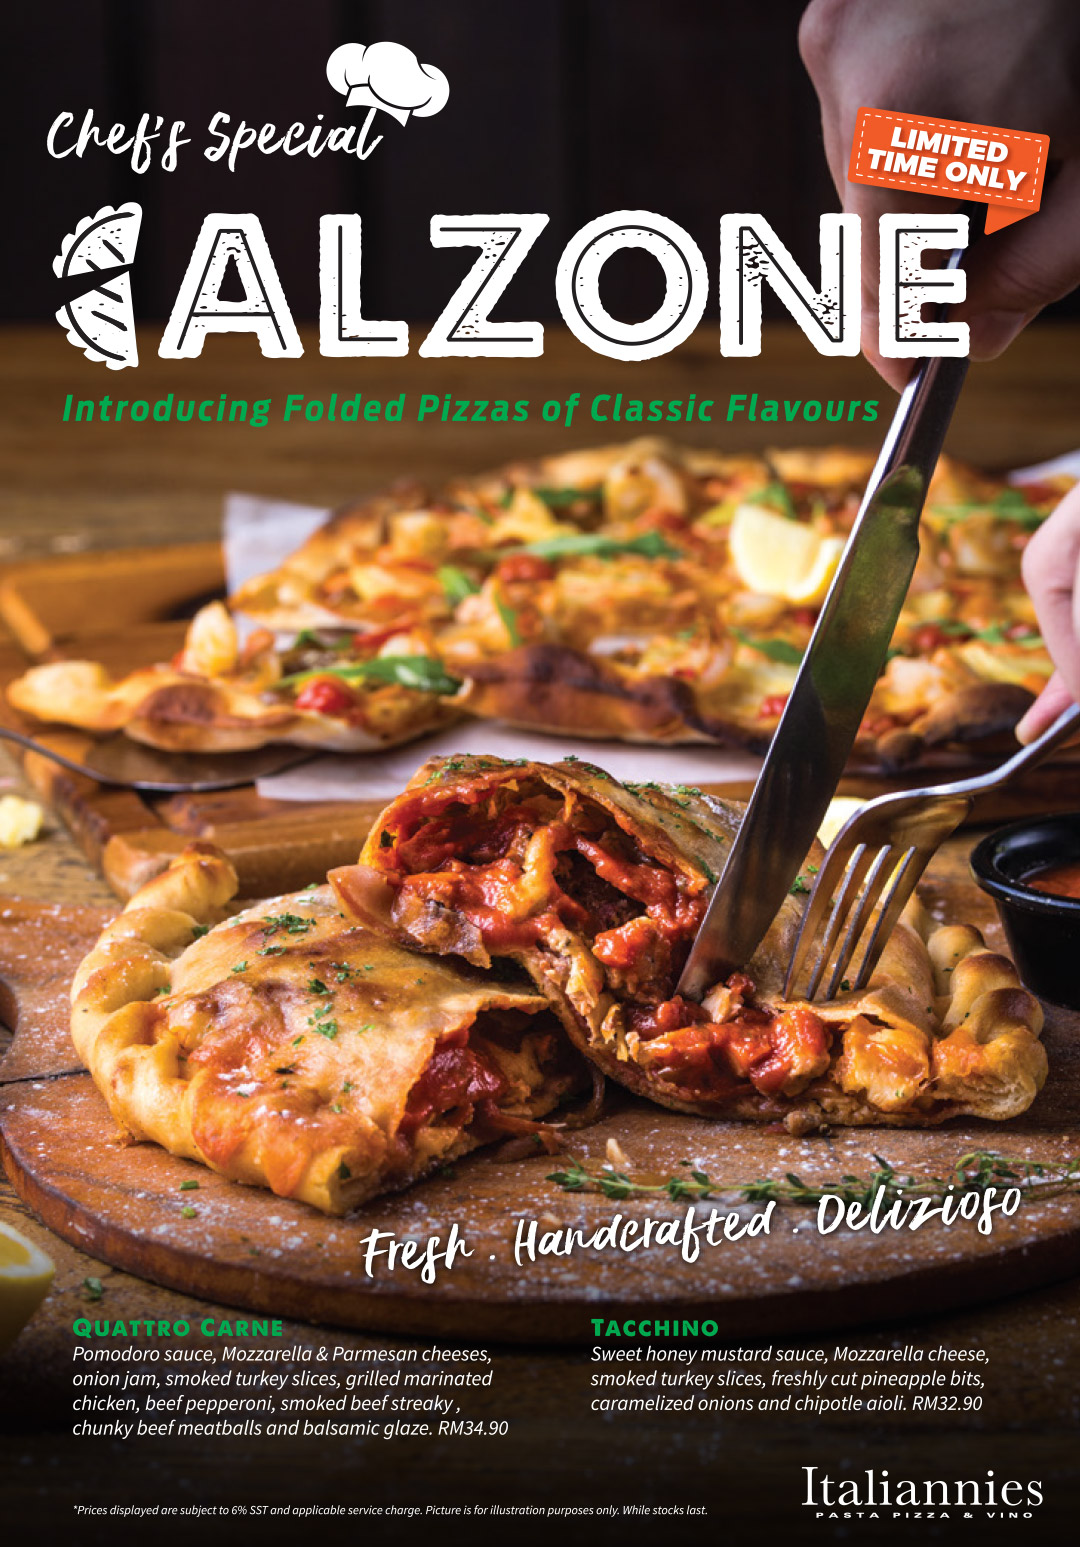 Calzone - Folded Pizzas